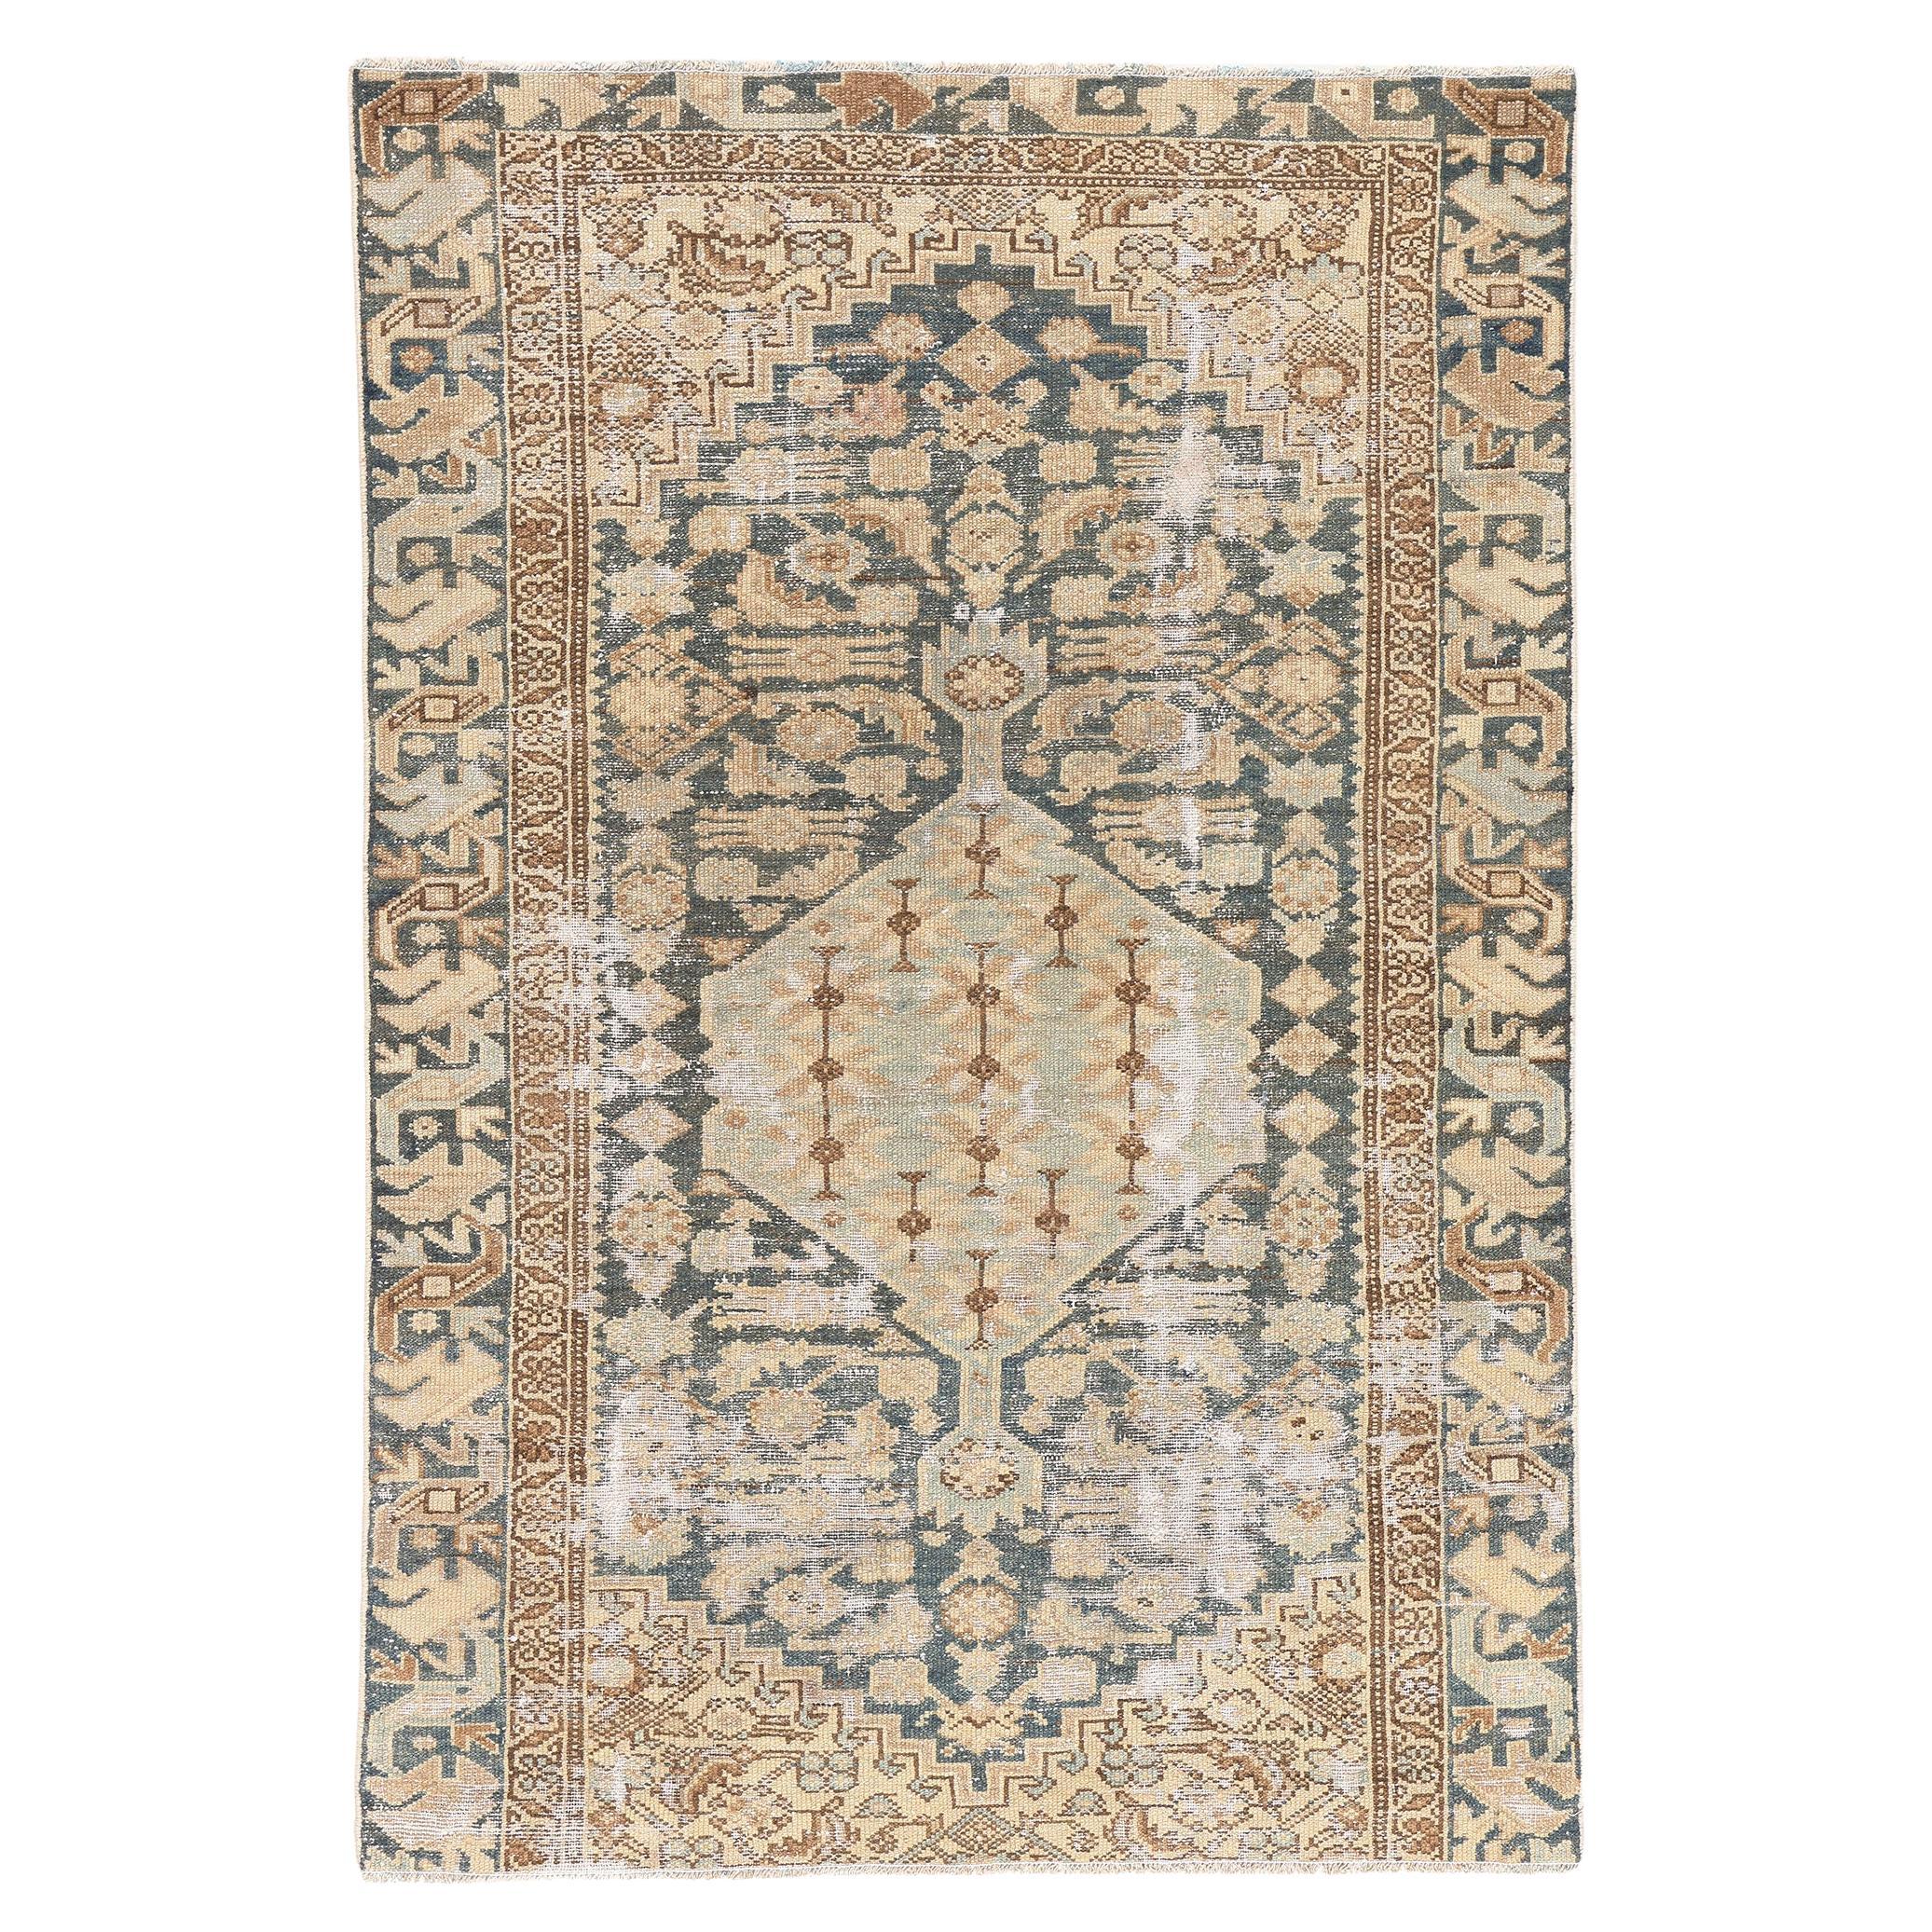 Antique Persian Malayer Rug, Weathered Finesse Meets Earth-Tone Elegance